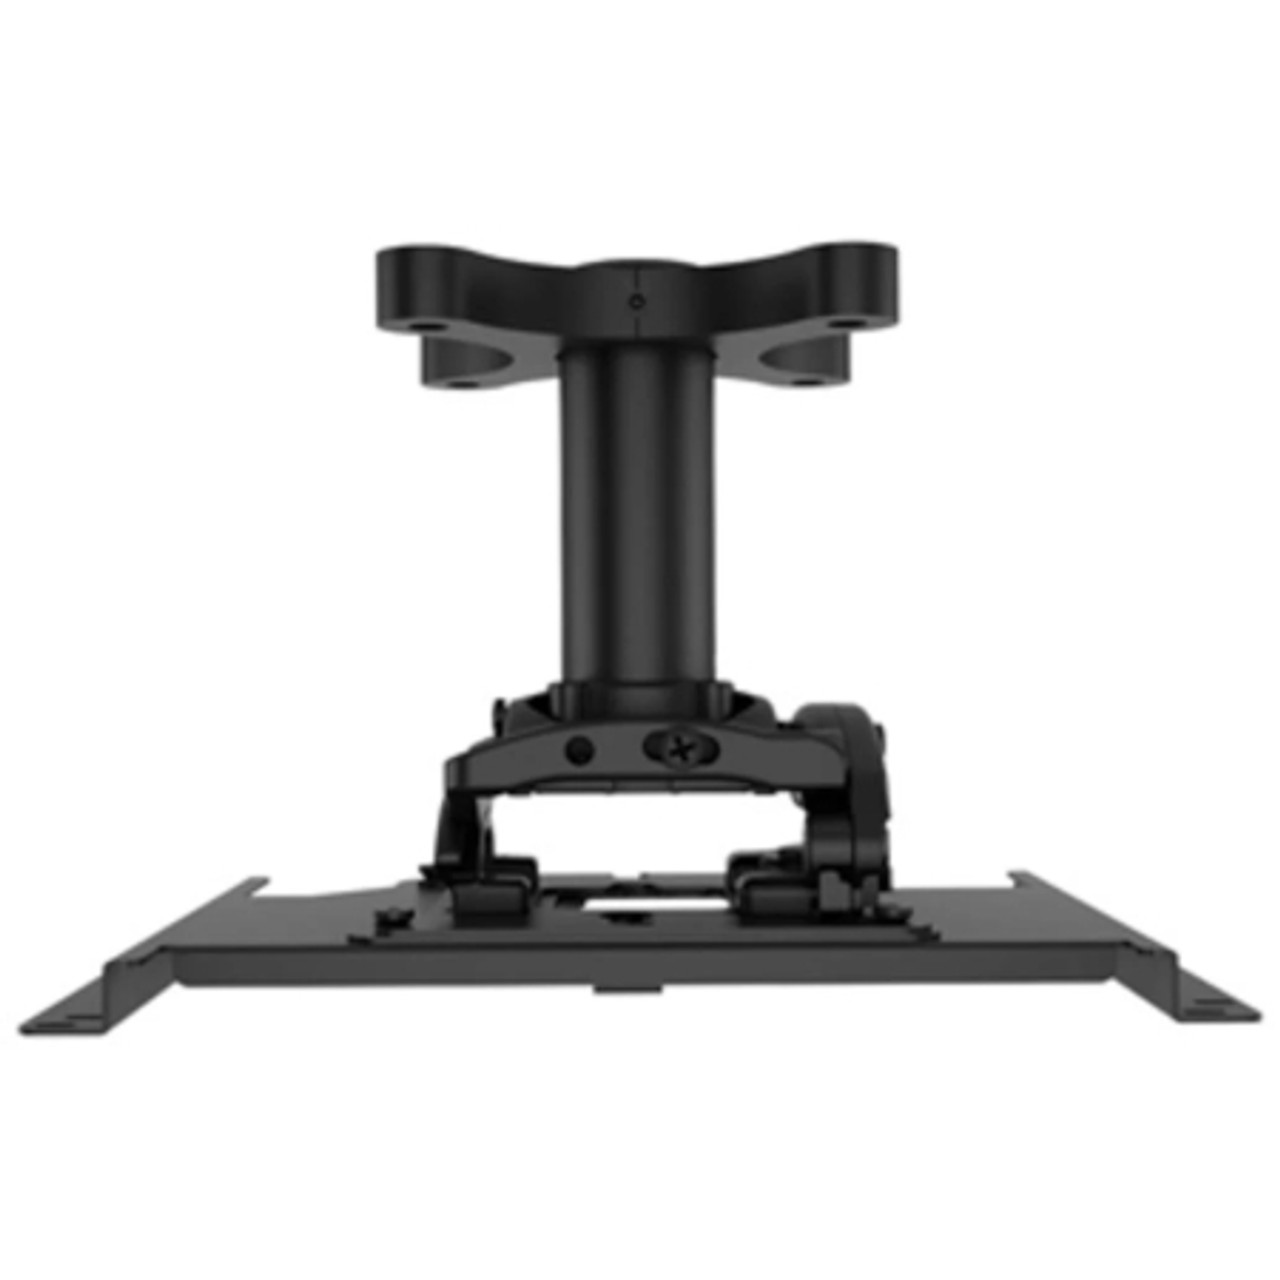 Shop | CHIEF CHF4500 Projector Ceiling Mount Kit